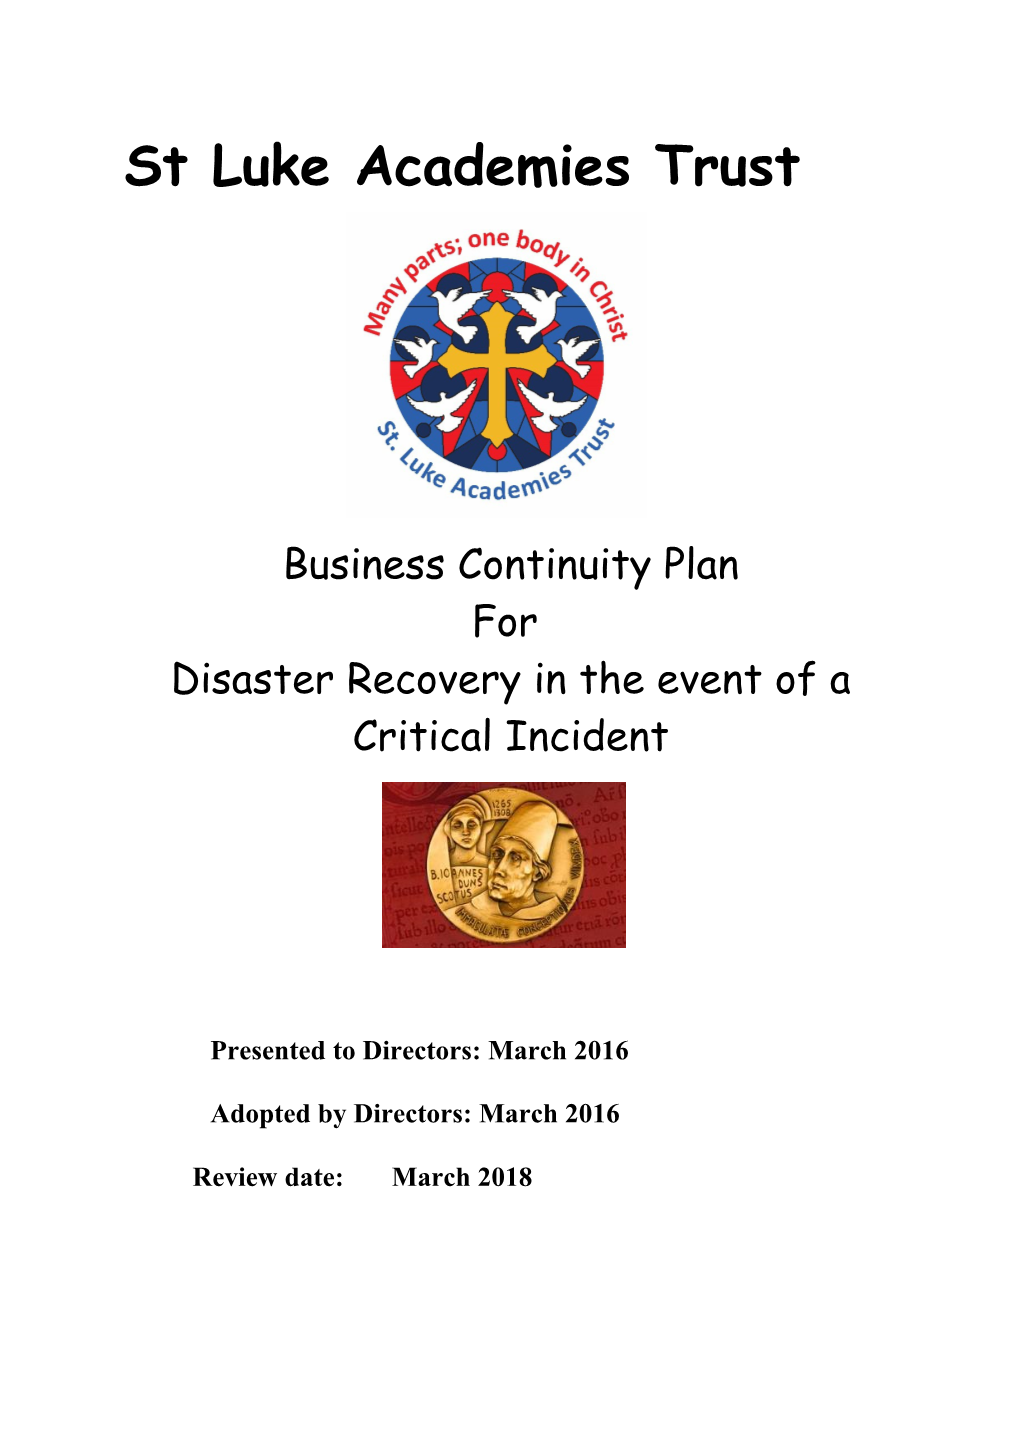 Disaster Recovery in the Event of a Critical Incident